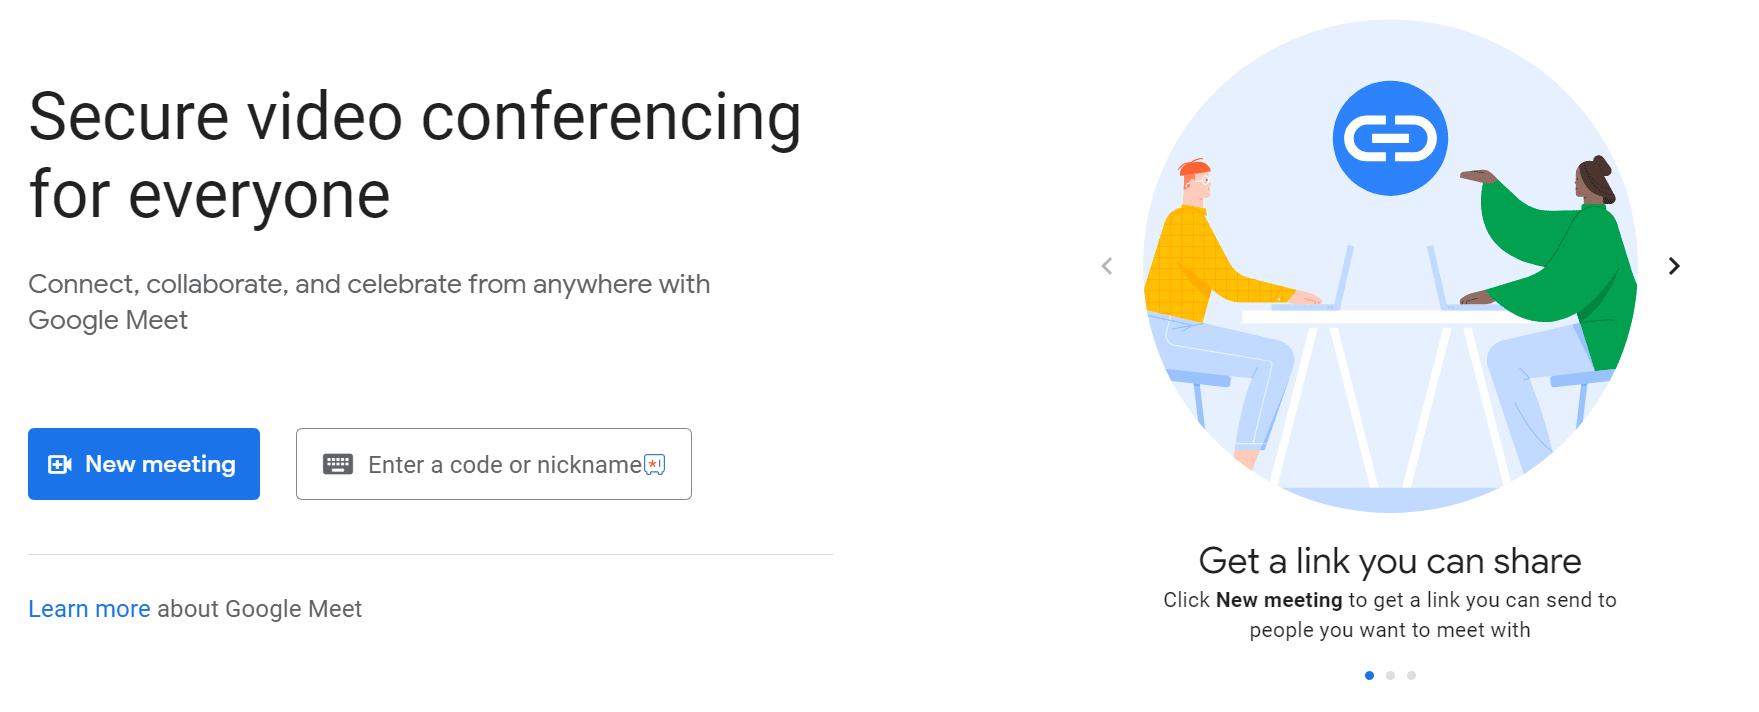 Google Meet offers free video conferencing software. 